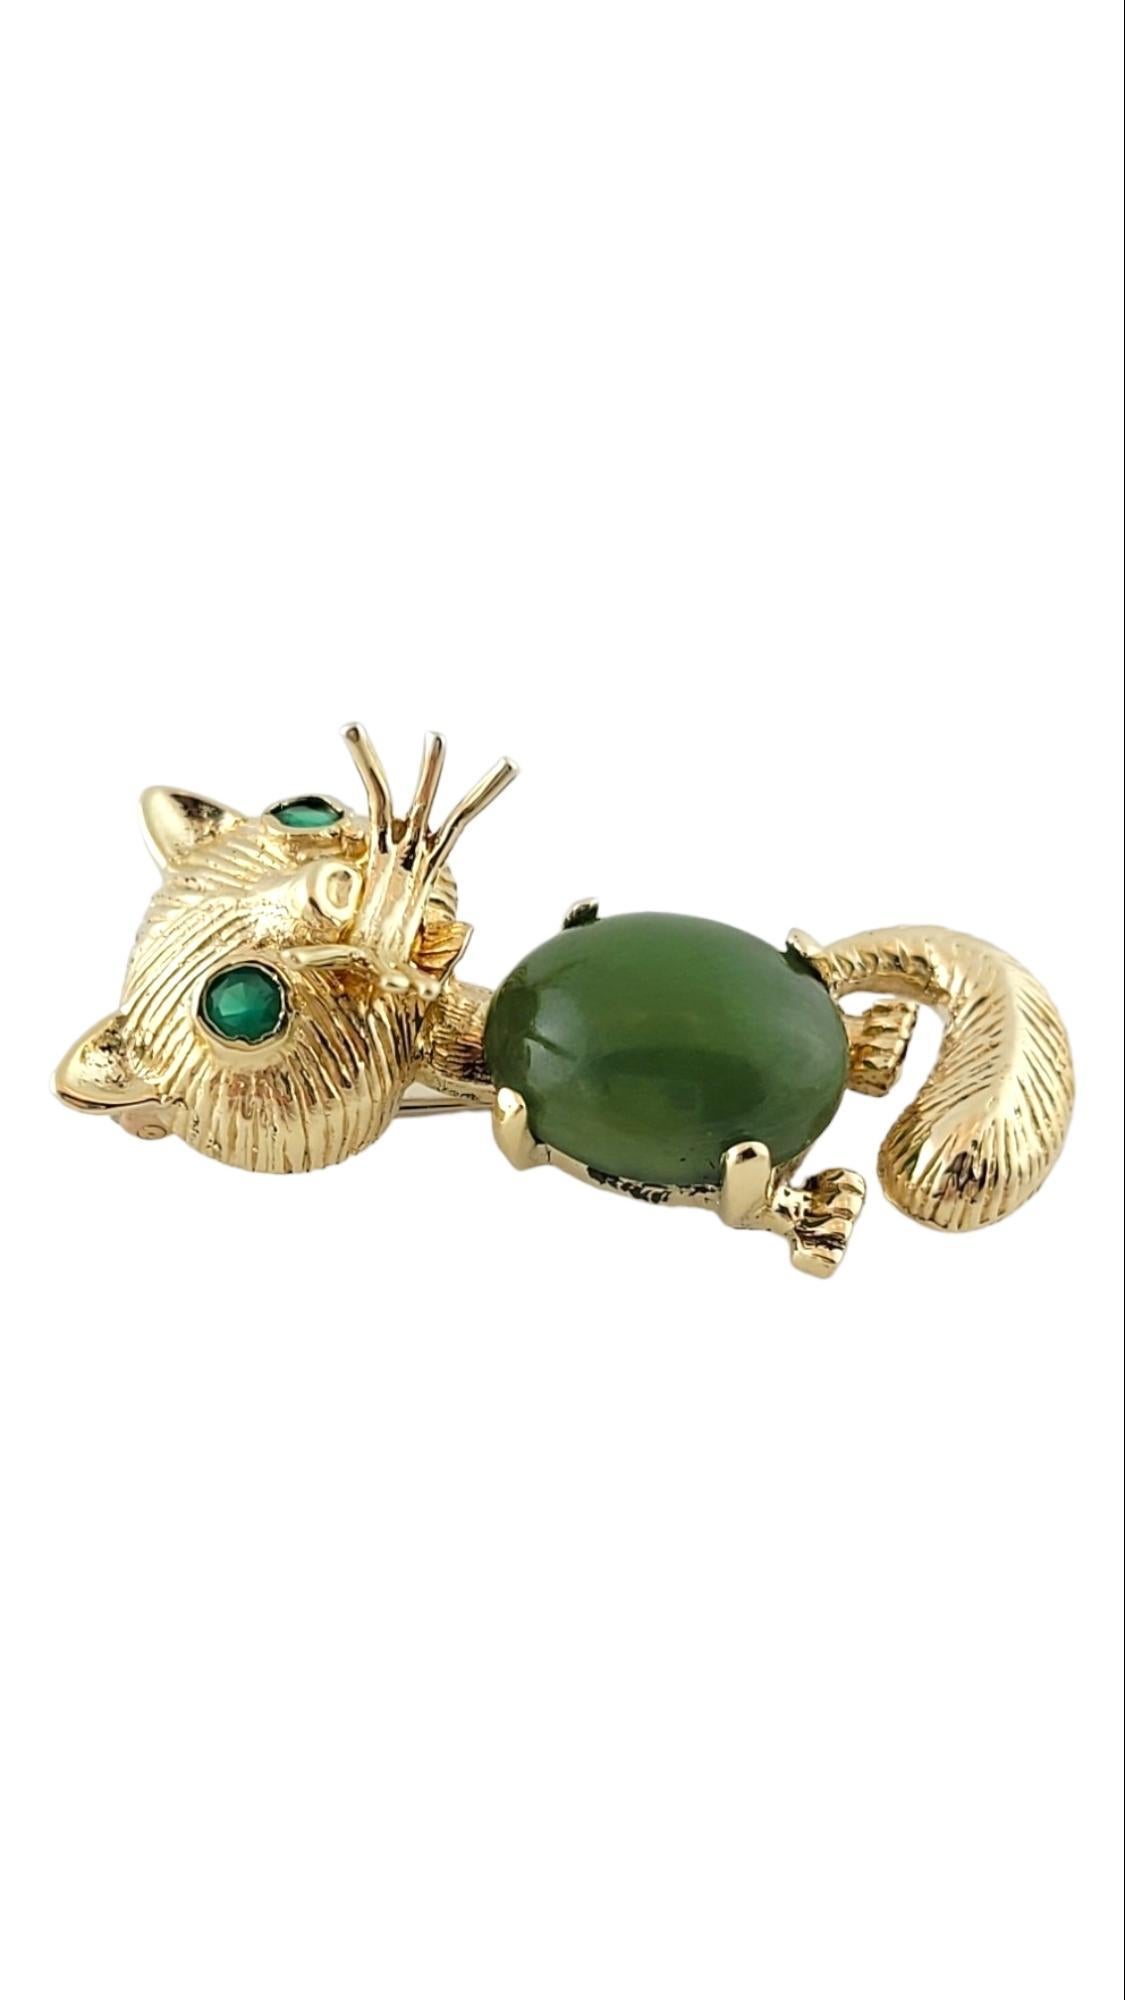 14K Yellow Gold Green Stone Cat Pin Brooch #15195 In Good Condition For Sale In Washington Depot, CT